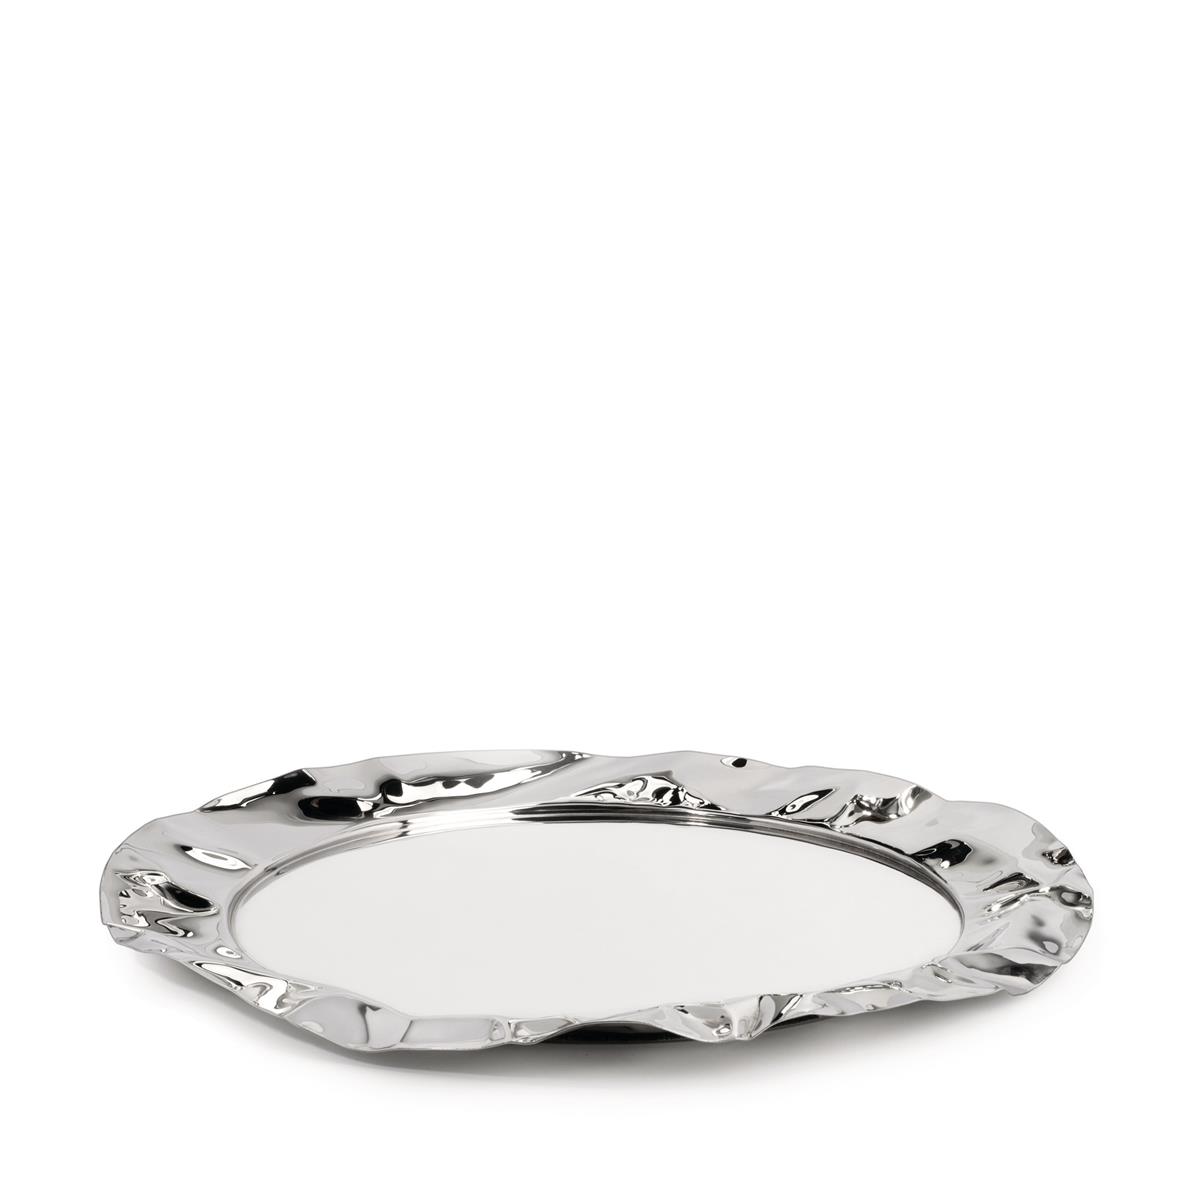 photo Alessi-Foix Round tray in polished 18/10 stainless steel